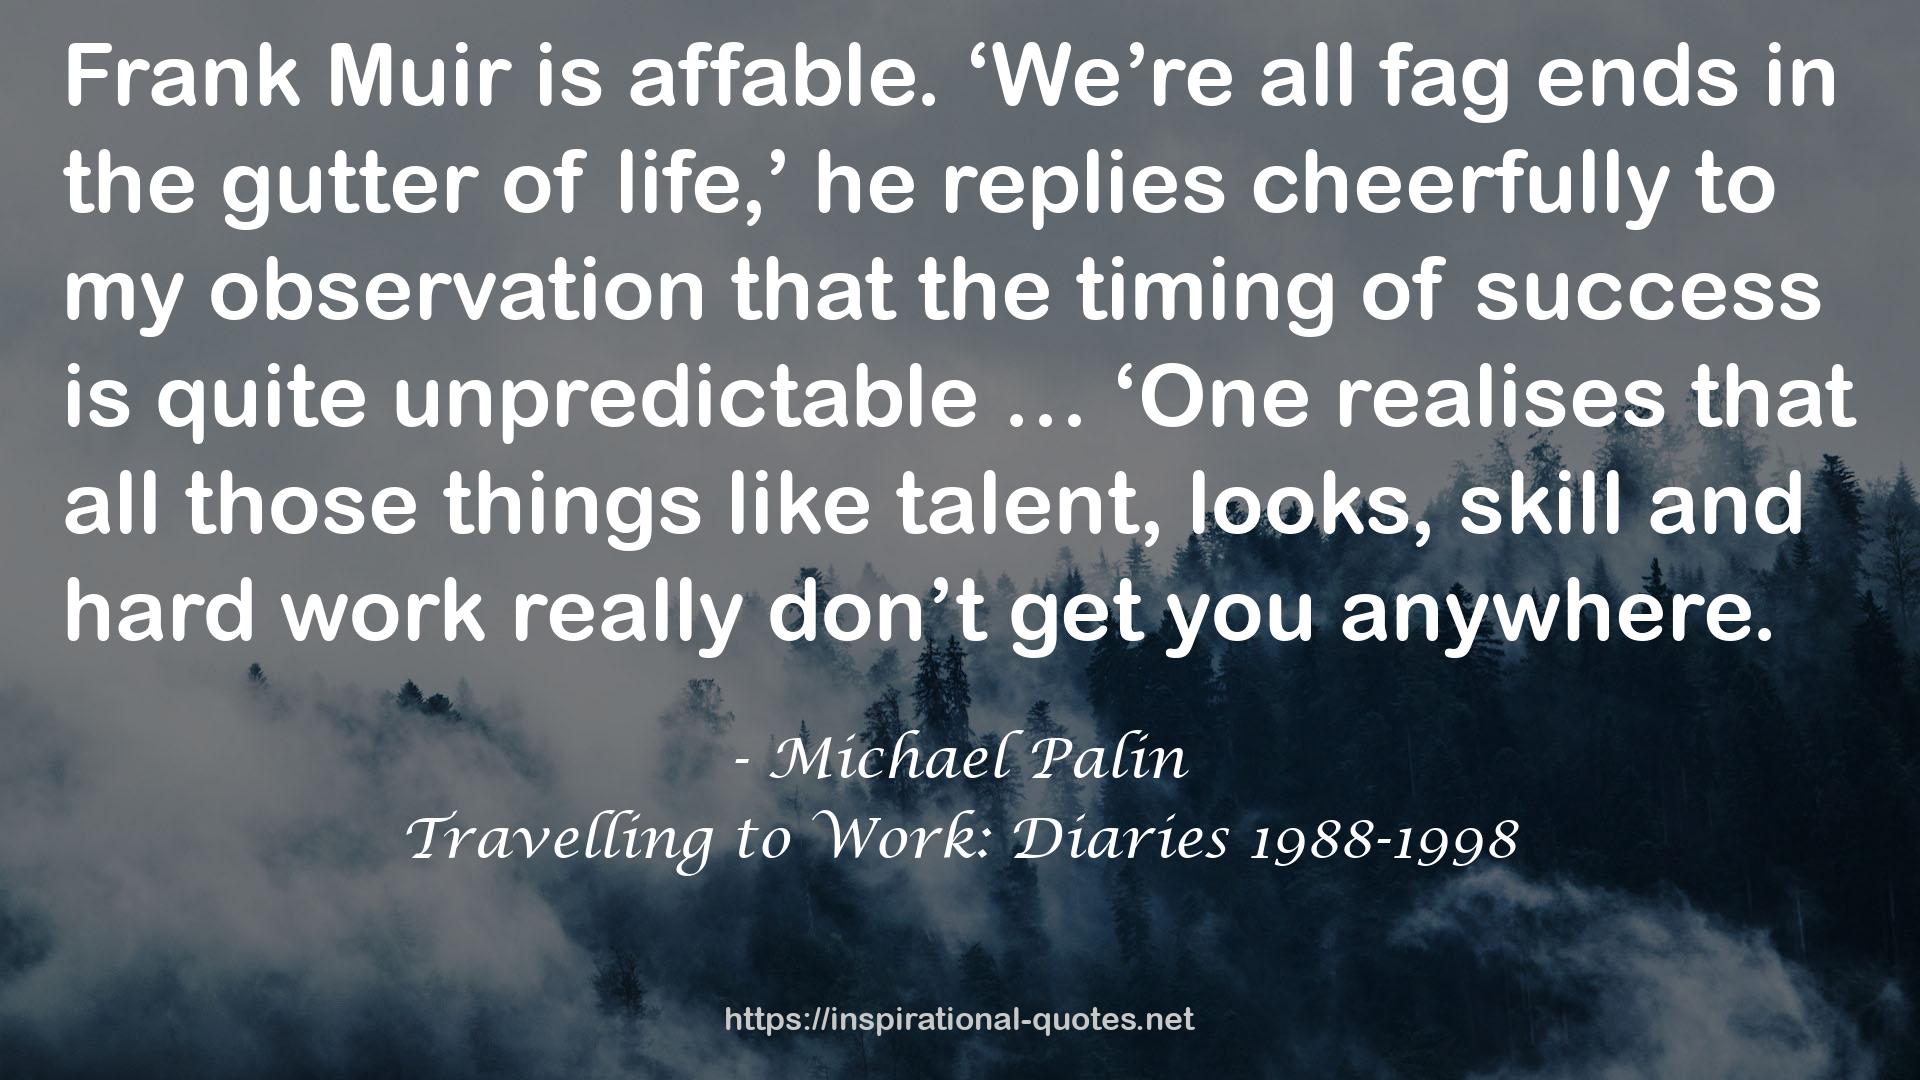 Travelling to Work: Diaries 1988-1998 QUOTES